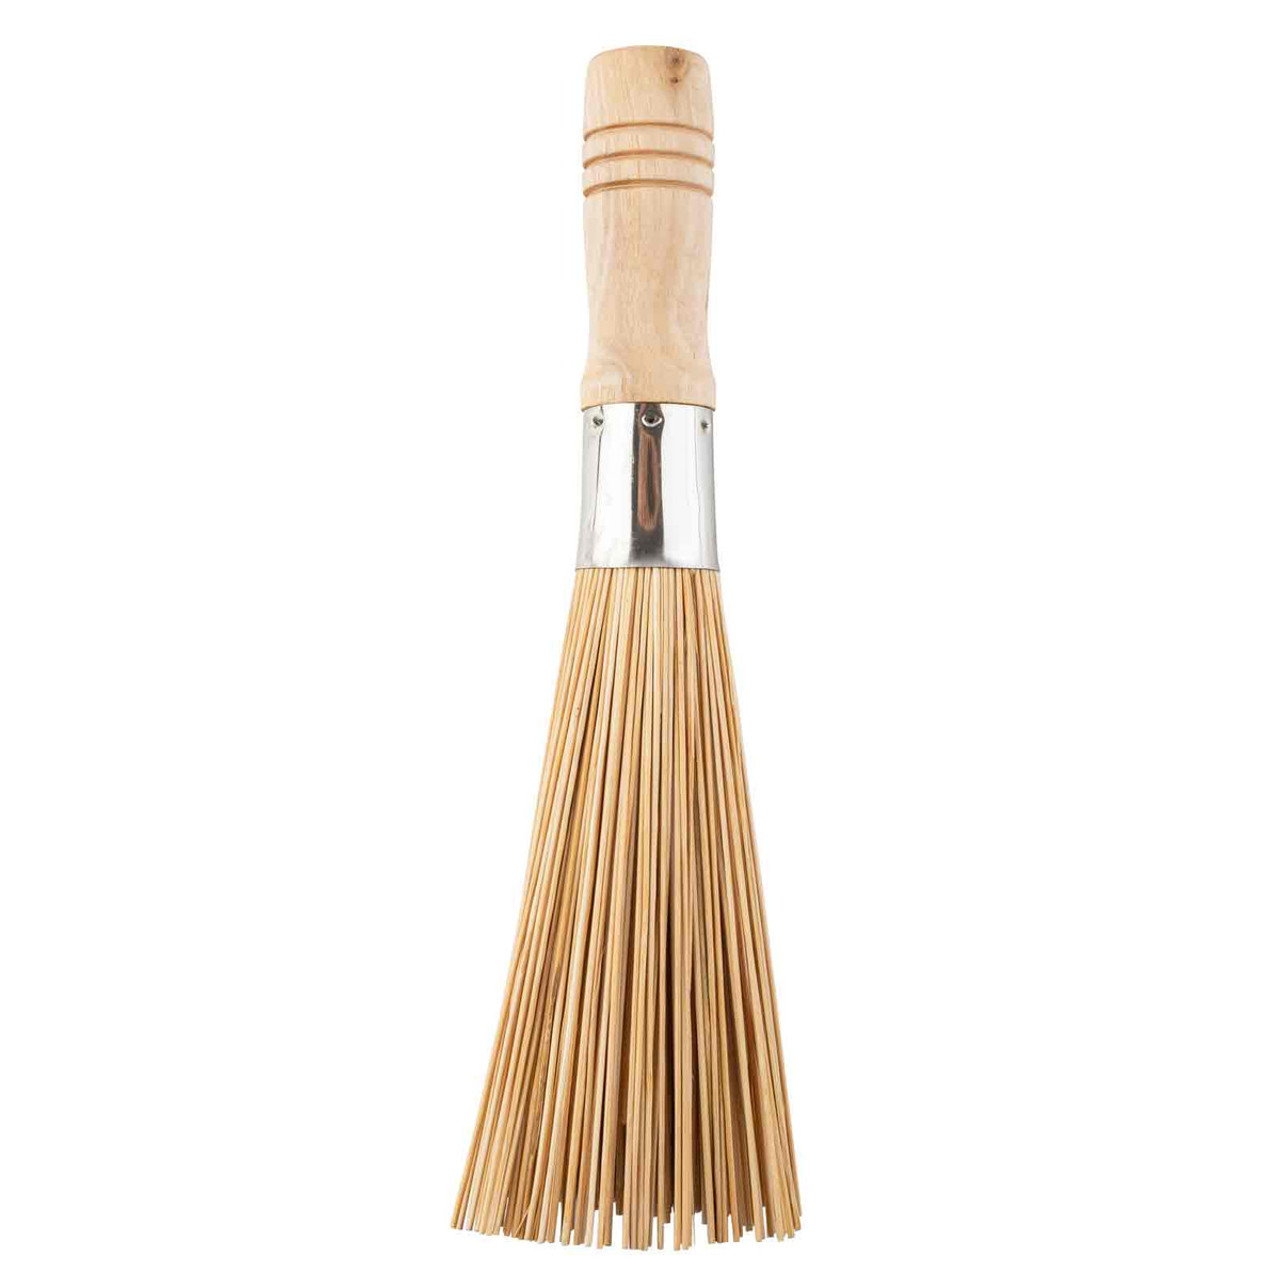 Household Kitchen Clean Tools Bamboo Cleaning Brush Pot Brush Wok Cleaning  Whisk Brush Cleaning Tools Home Bamboo Brush